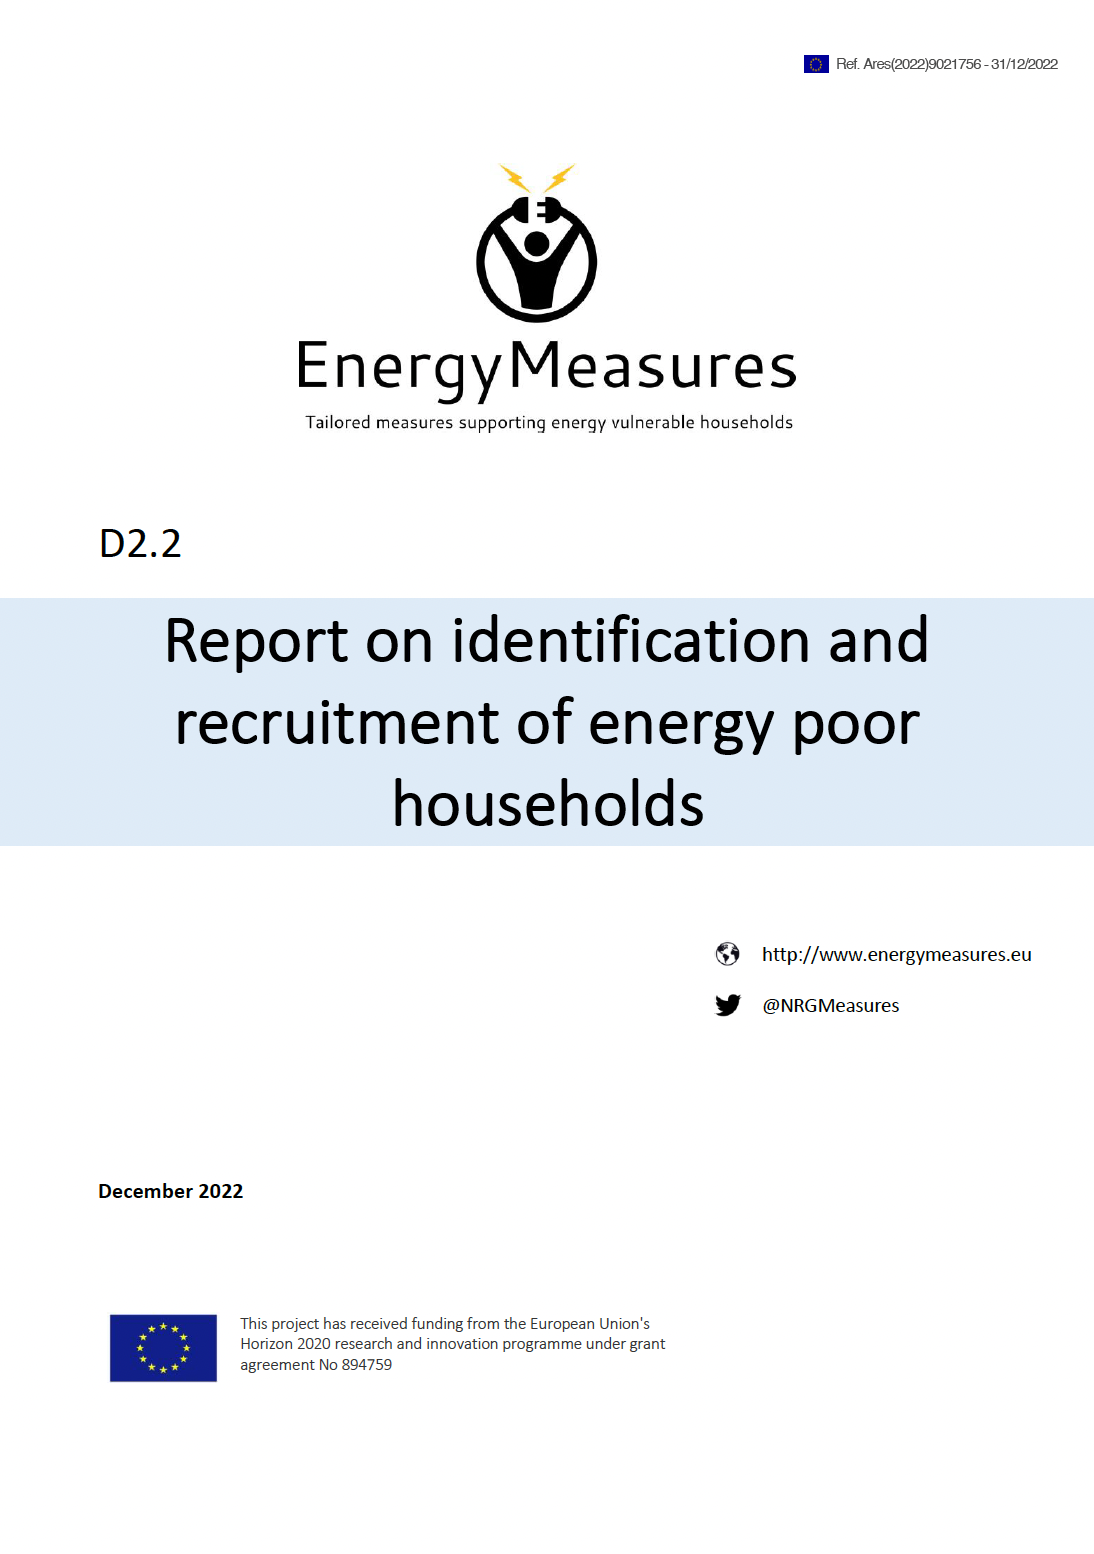 D2.2 Report on identification and recruitment of energy poor households